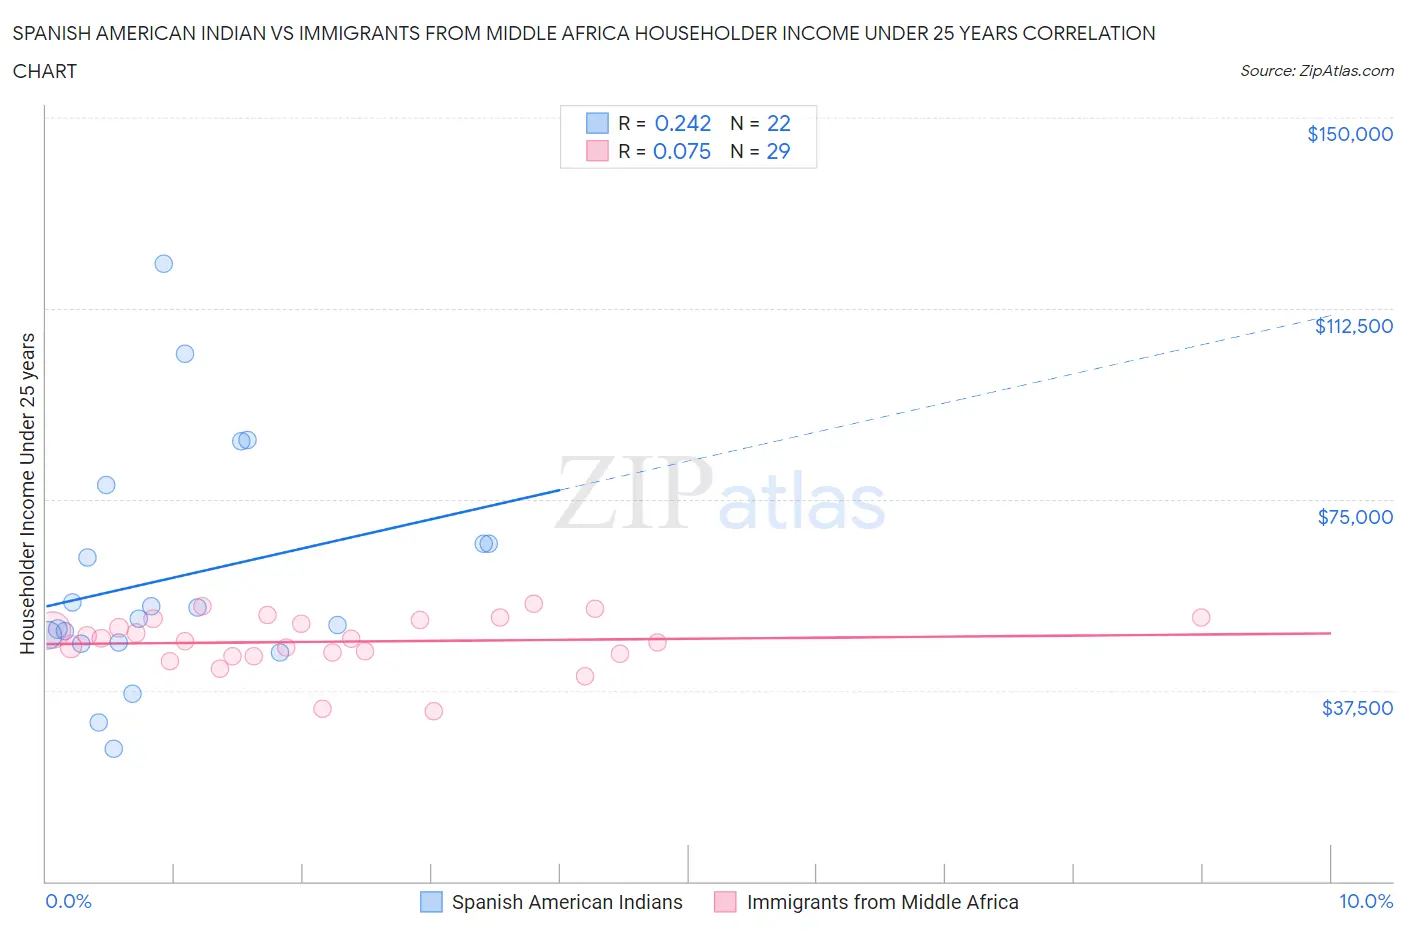 Spanish American Indian vs Immigrants from Middle Africa Householder Income Under 25 years